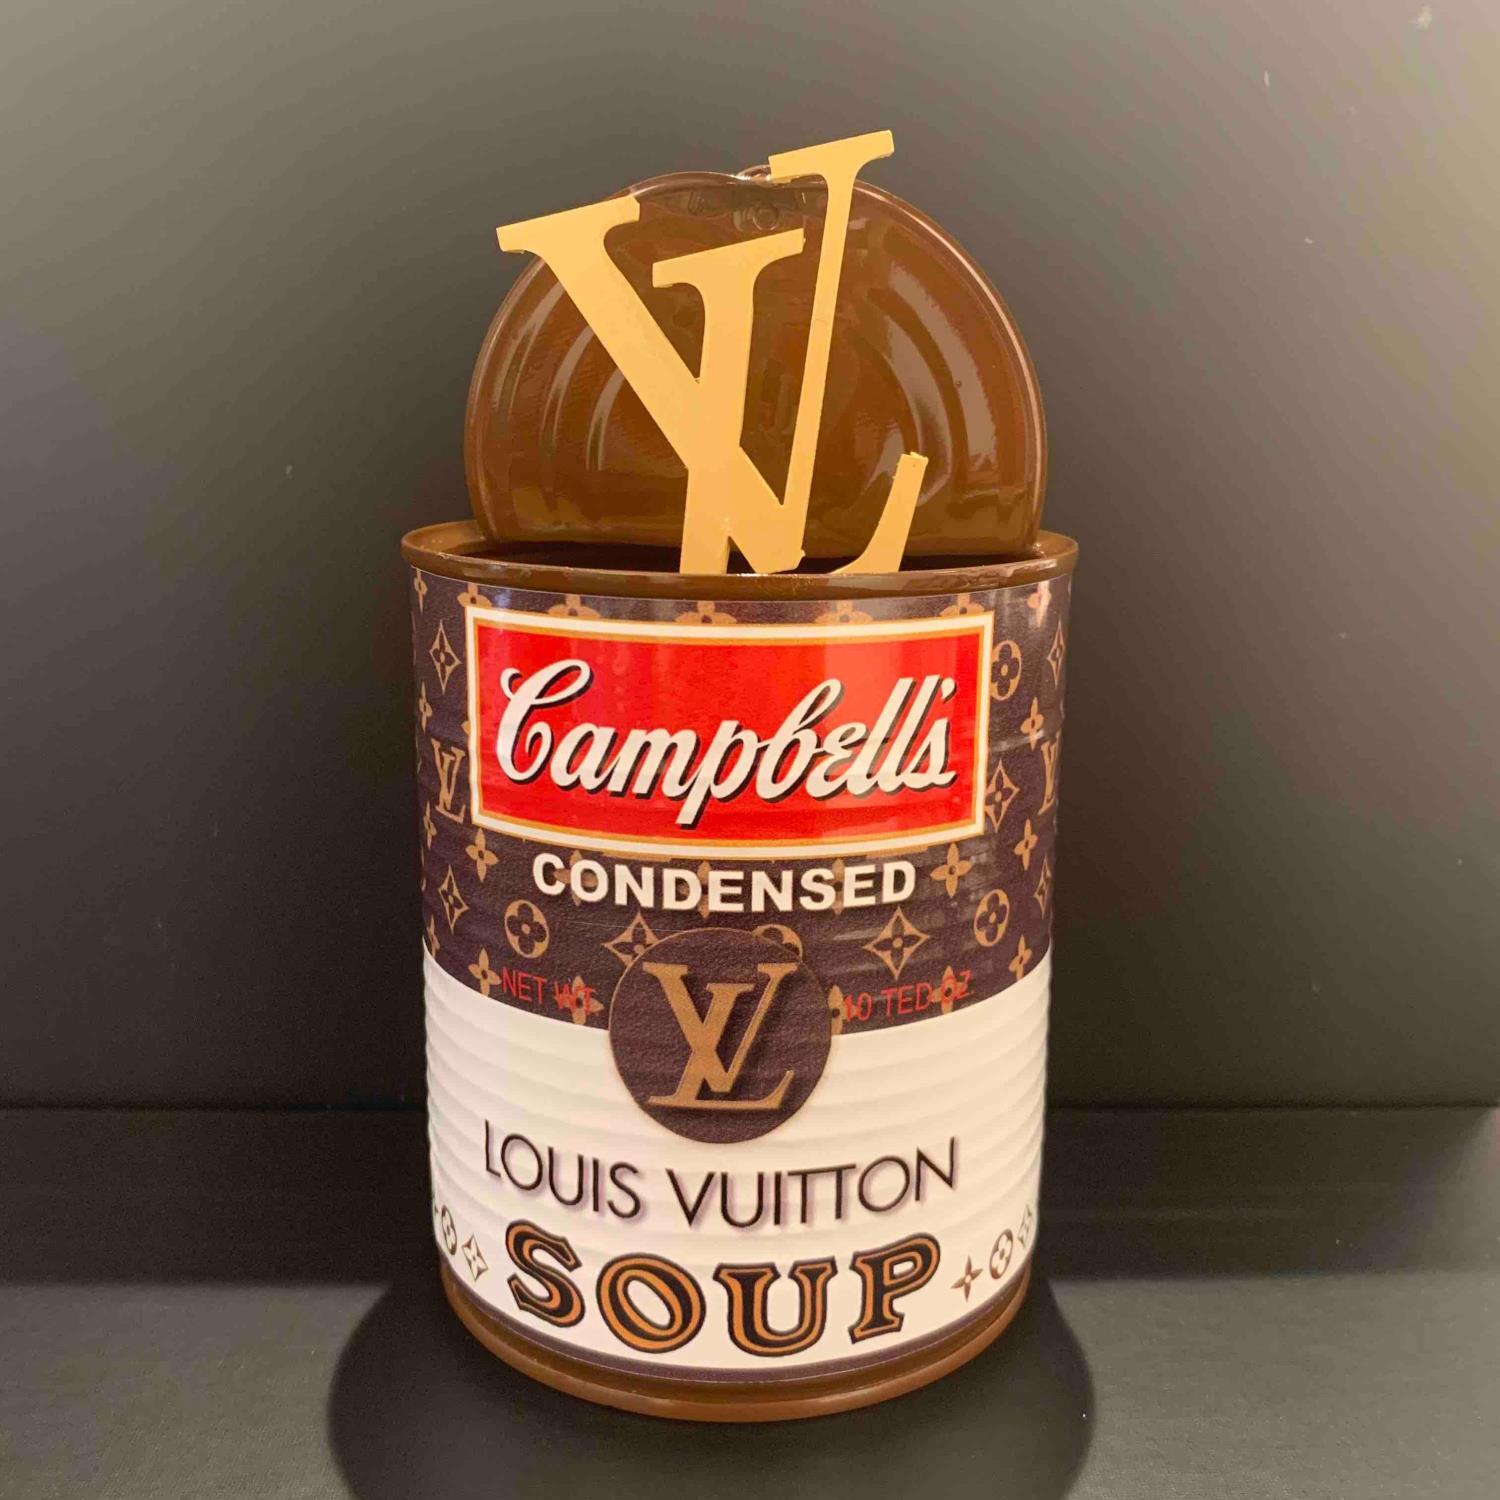 Contemporary Art - Mixed media - Campbell's Soup LV - Ted Pop Art